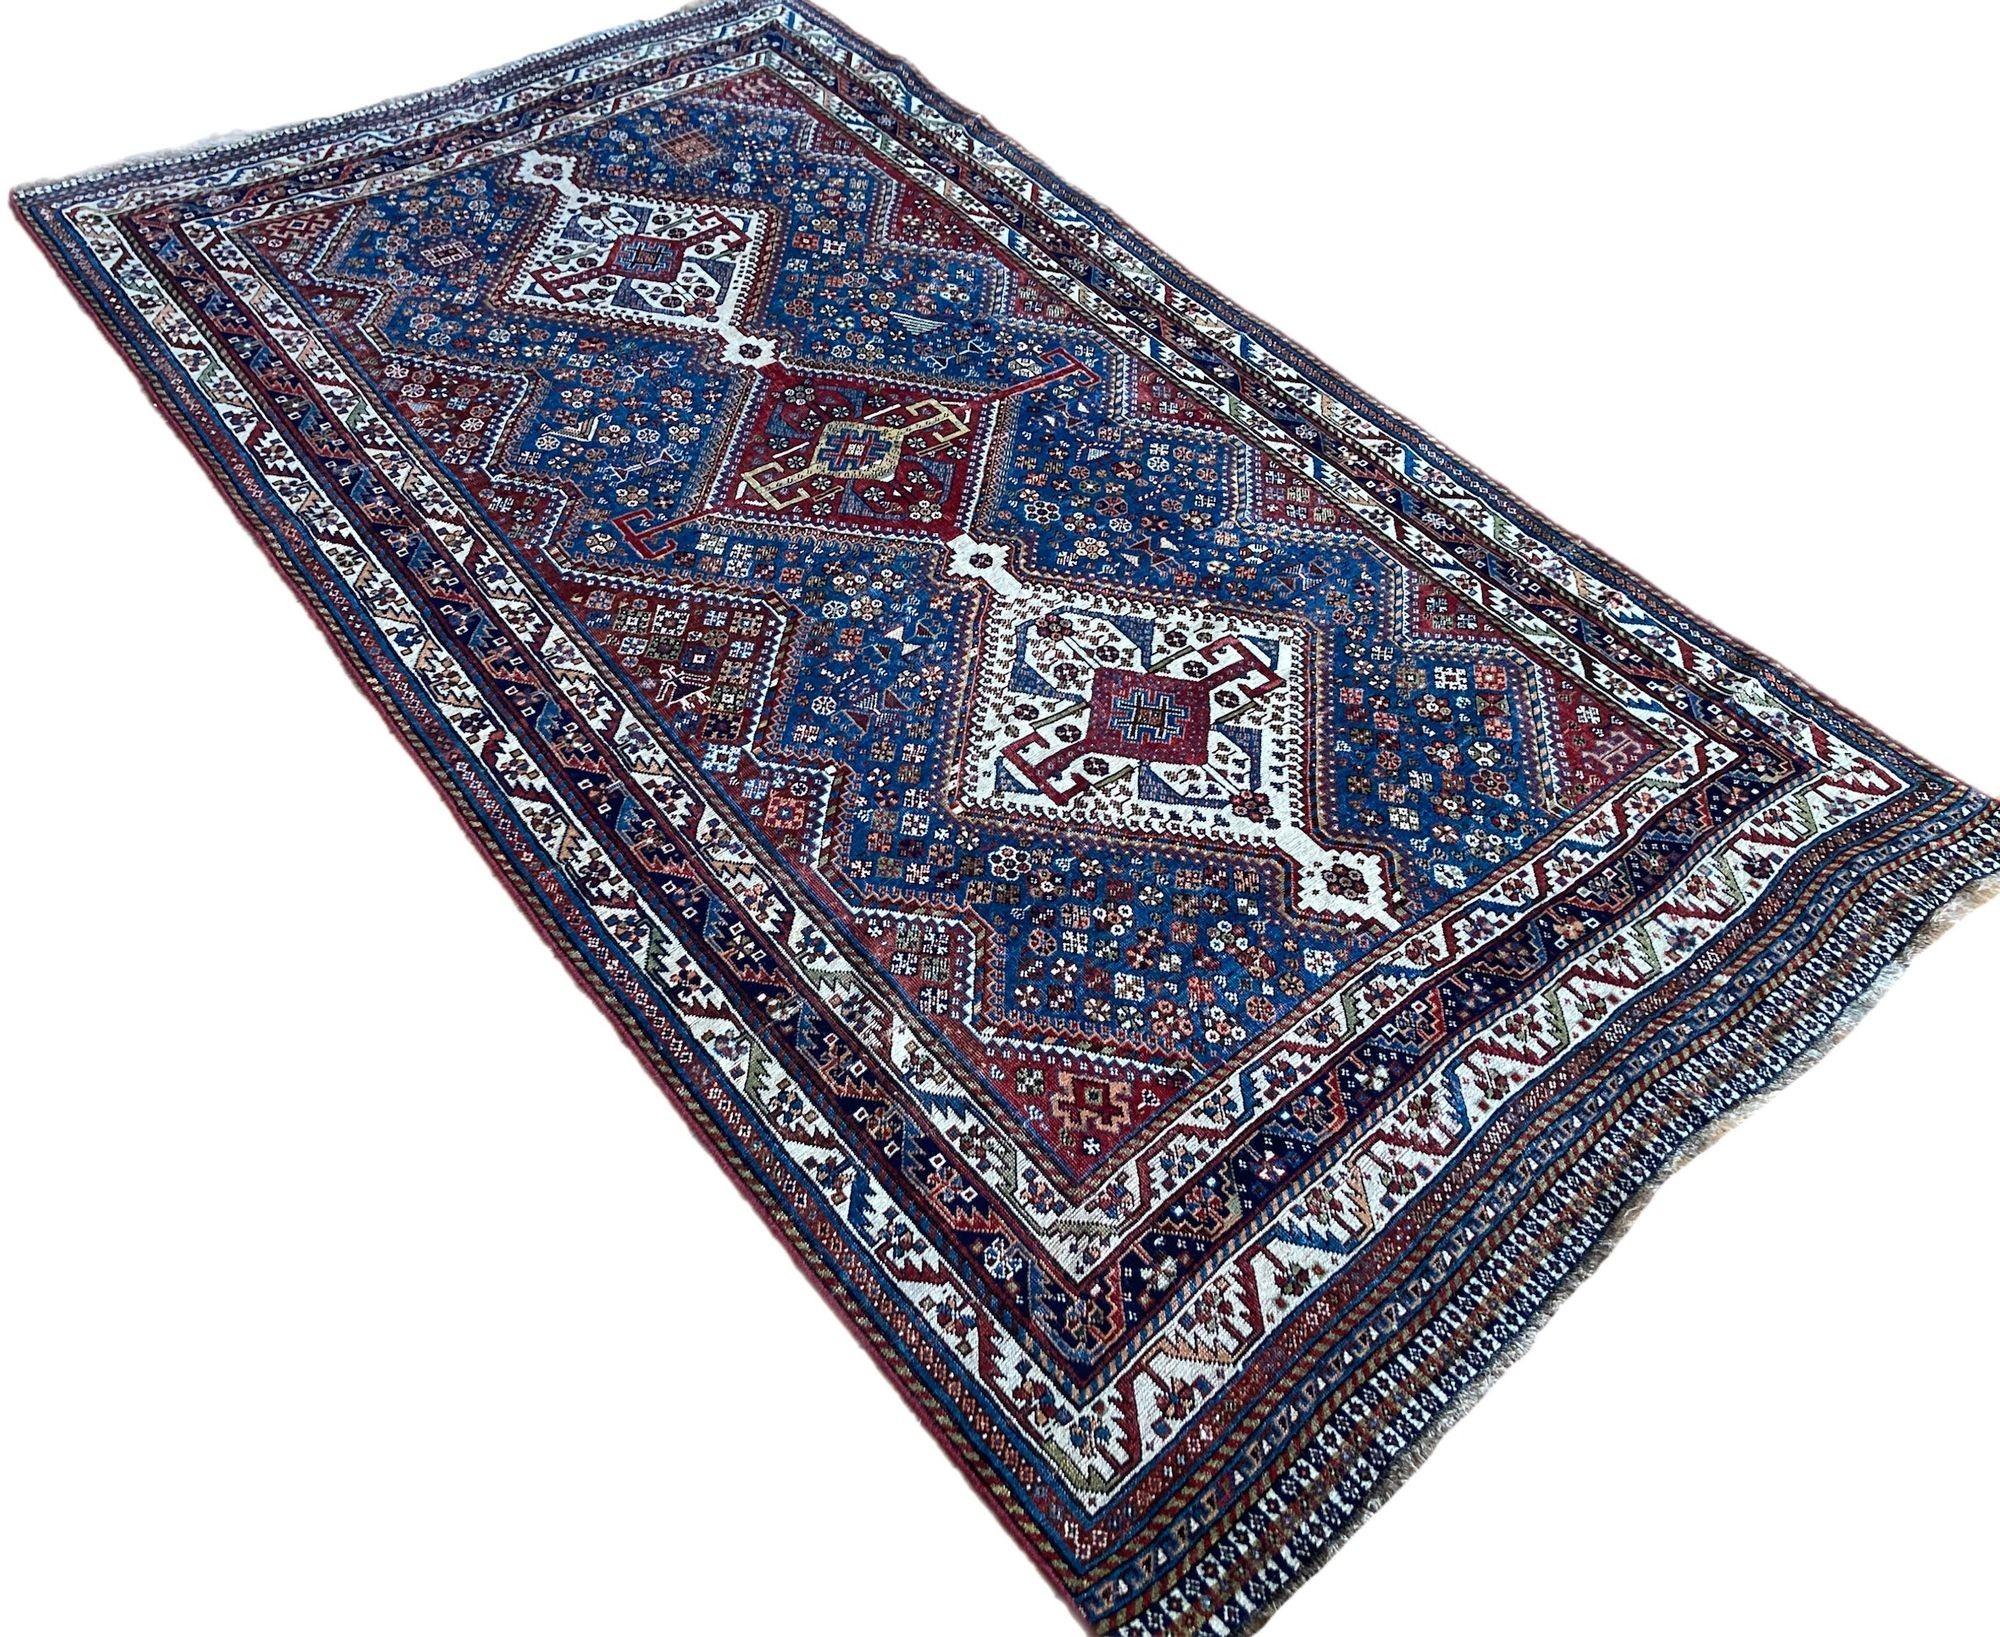 Antique Qashqai Rug 2.54m X 1.41m In Good Condition For Sale In St. Albans, GB